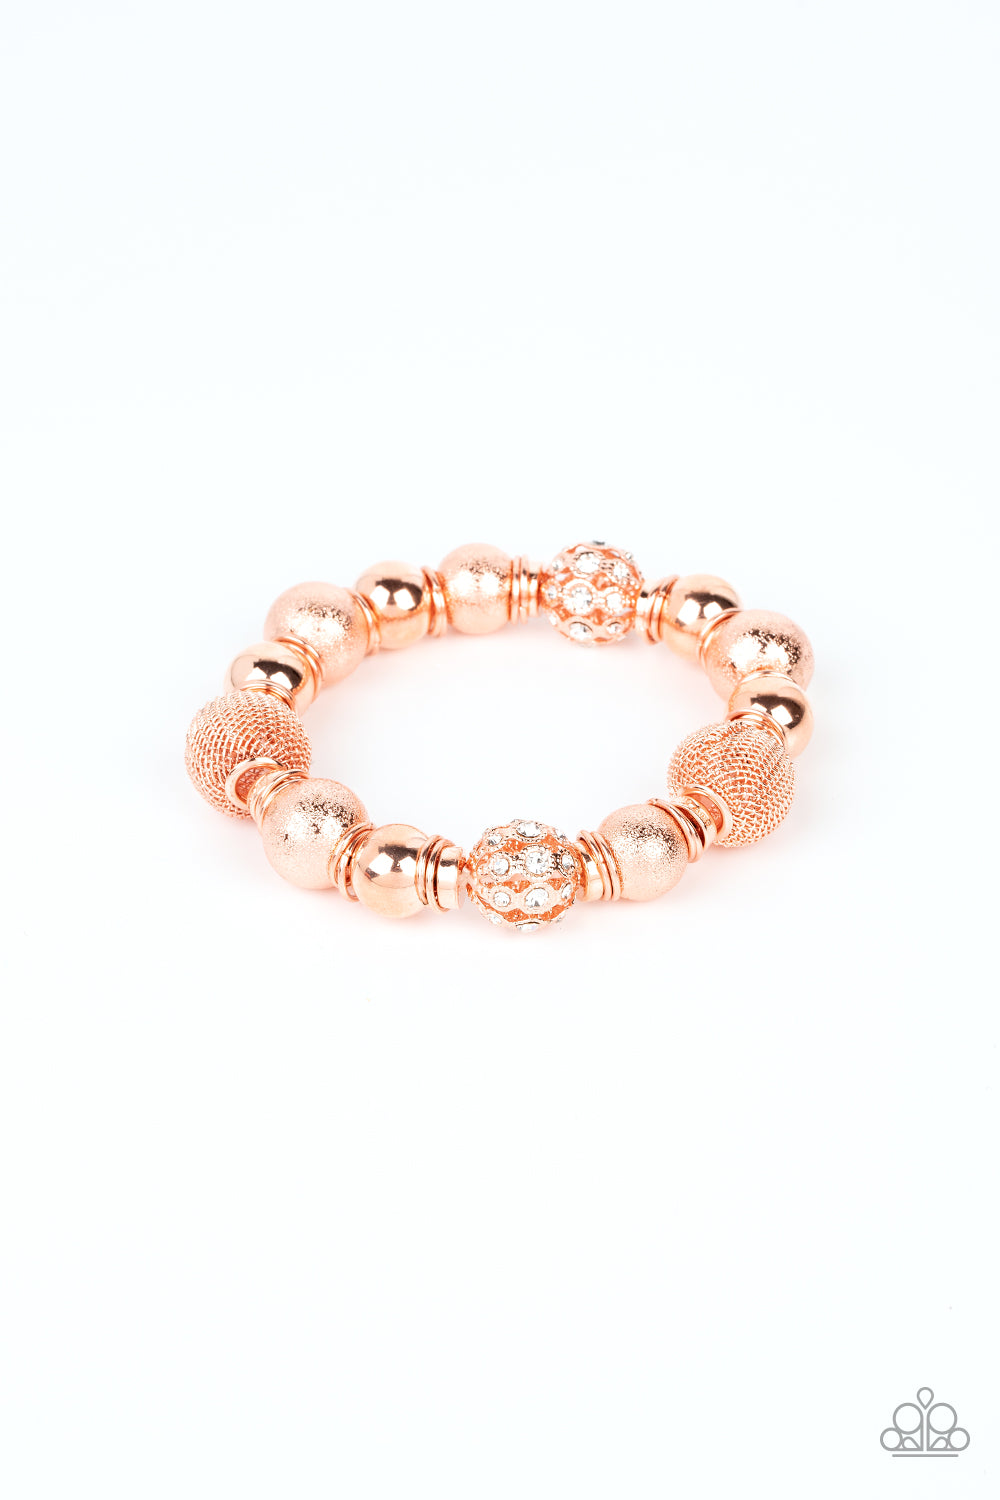 We Totally Mesh - Copper Oversized Beads, Mesh Beads, Rings, & White Rhinestone Accent Paparazzi Stretch Bracelet